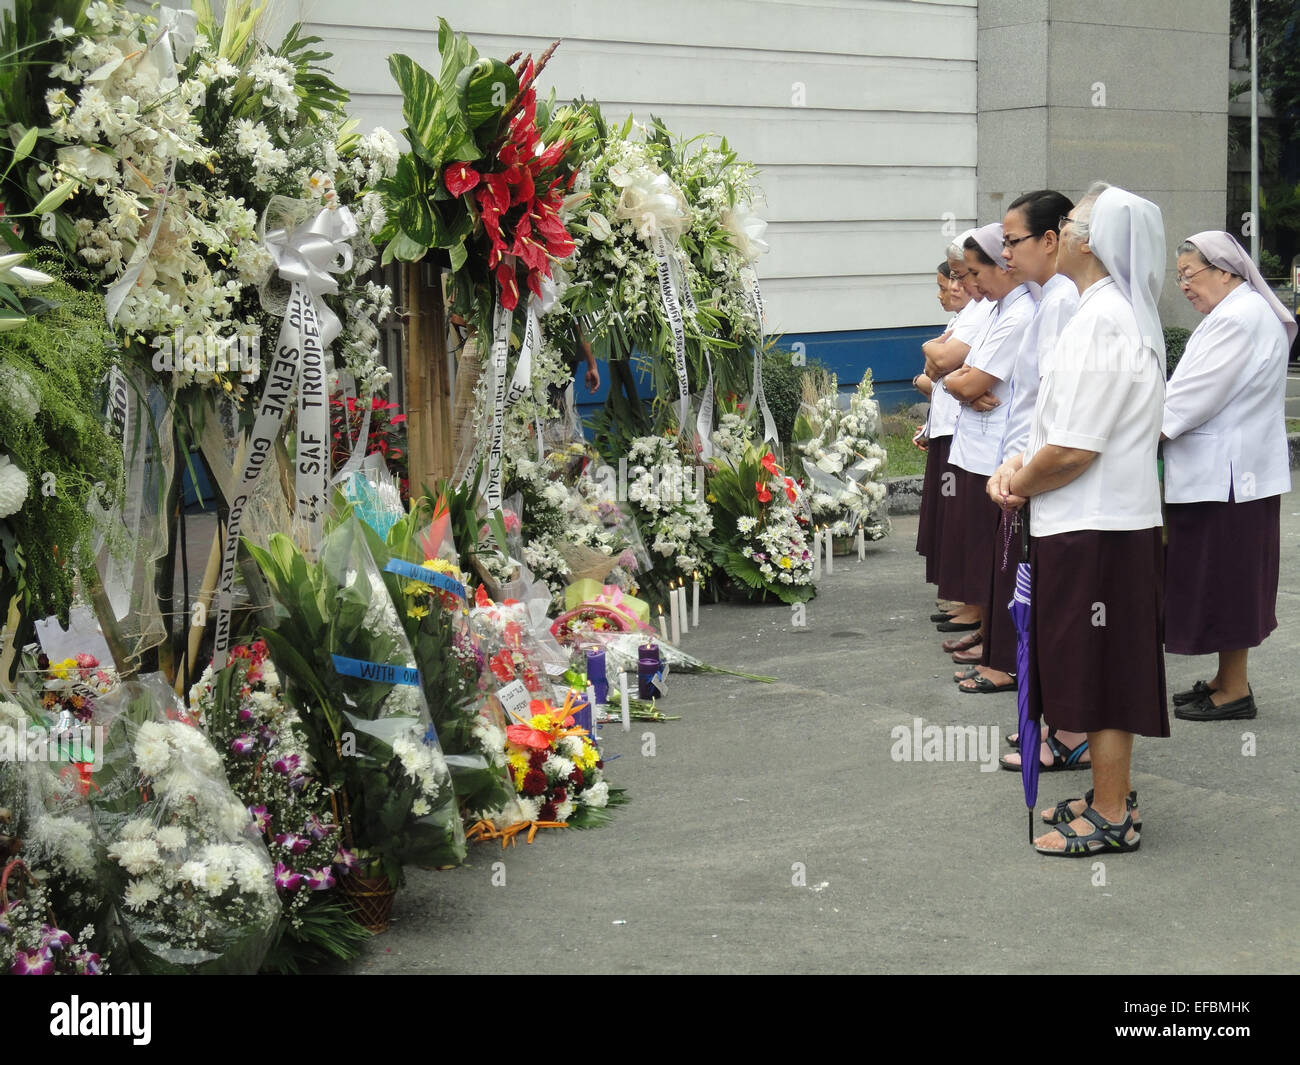 Nuns from the Religious of the Assumption pray in front of flower wreaths outside the Philippine National Police headquarters, in memory of the 44 elite commandos who were killed in an encounter against Moro seperatist rebels. Philippine President Benigno Aquino III declared a National Day of Mourning to commemorate the 44 elite commandos who were slain in an encounter at Mamasapano, Maguindanao province. © Richard James Mendoza/Pacific Press/Alamy Live News Stock Photo